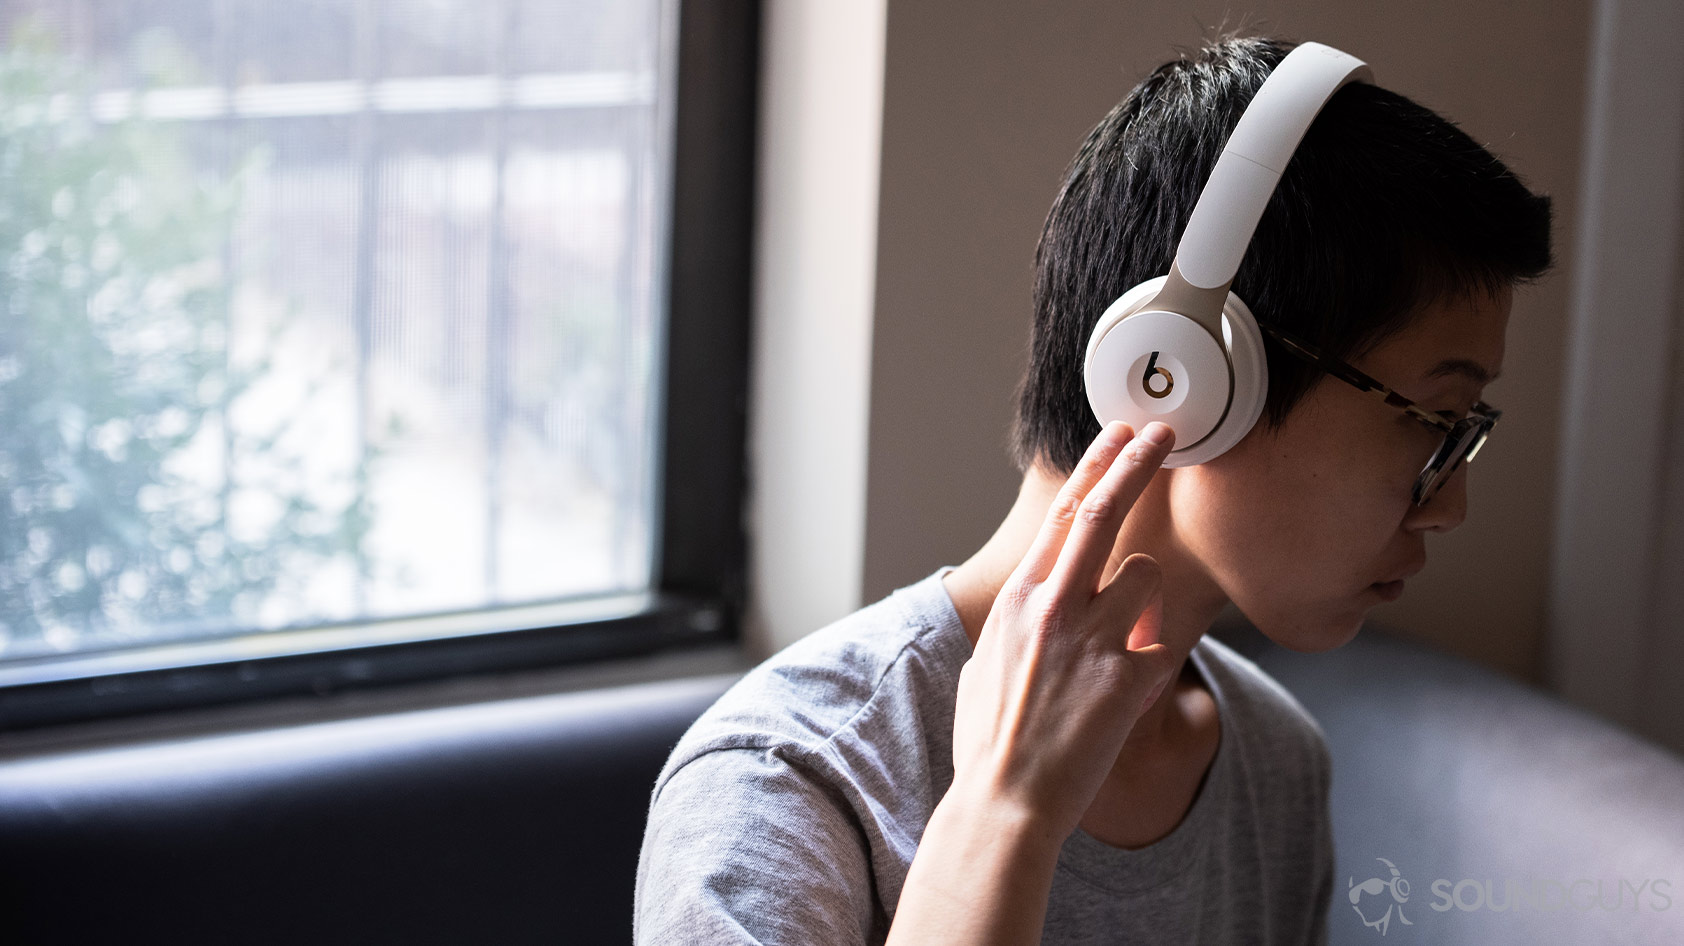 Beats Solo Pro review: Good but discontinued - SoundGuys